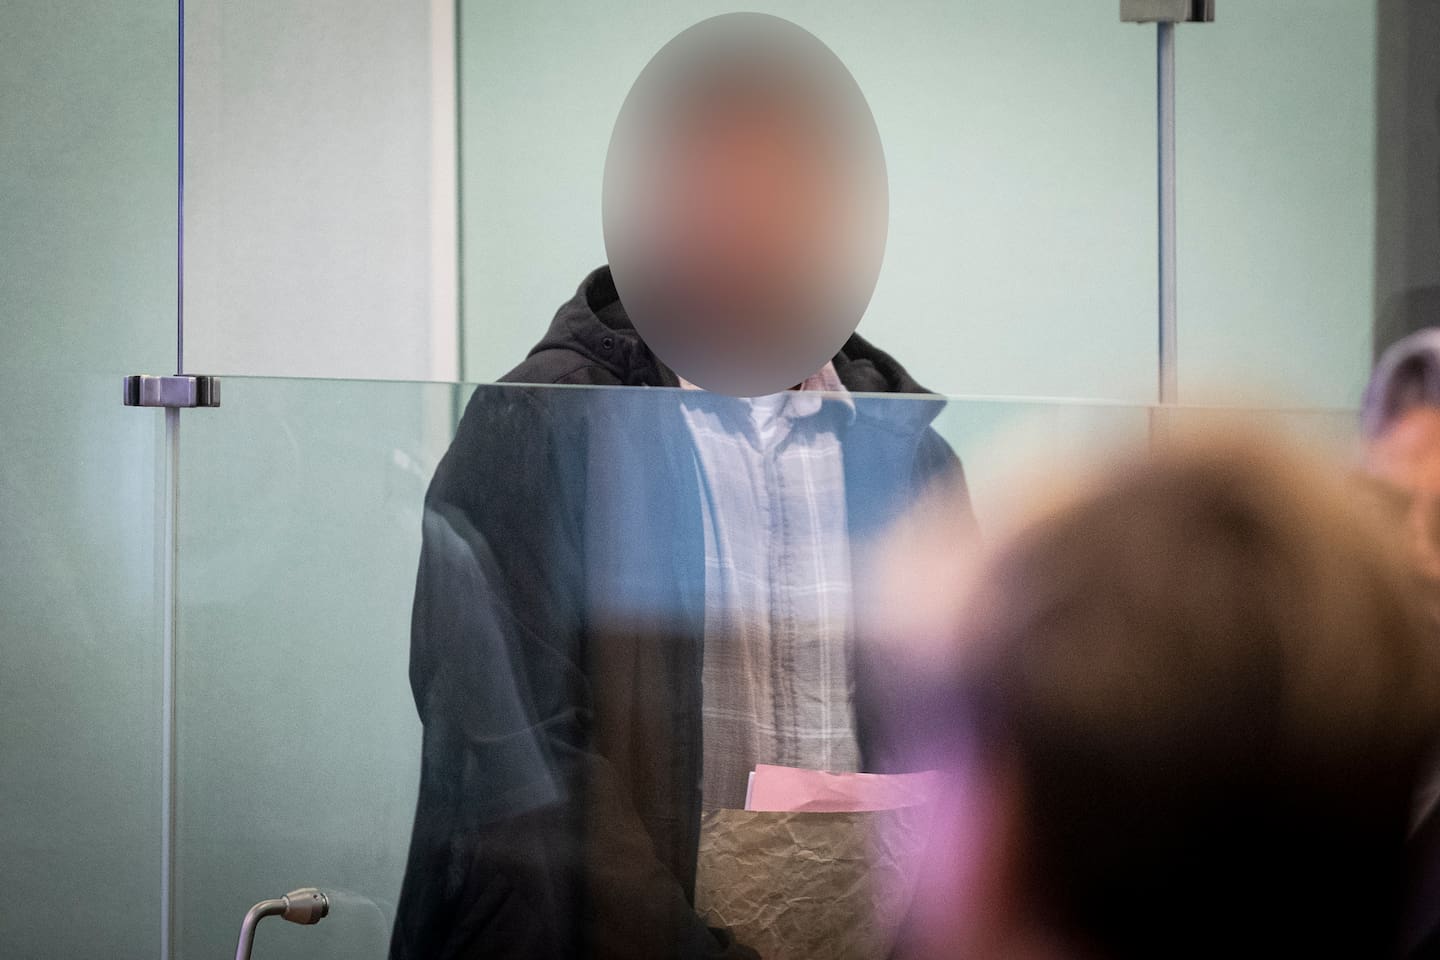 A Rosehill man appears in the High Court at Auckland on a charge of attempted murder after revealing to a young girl that he wasn't her real father then immediately cutting her throat. Photo / Jason Oxenham